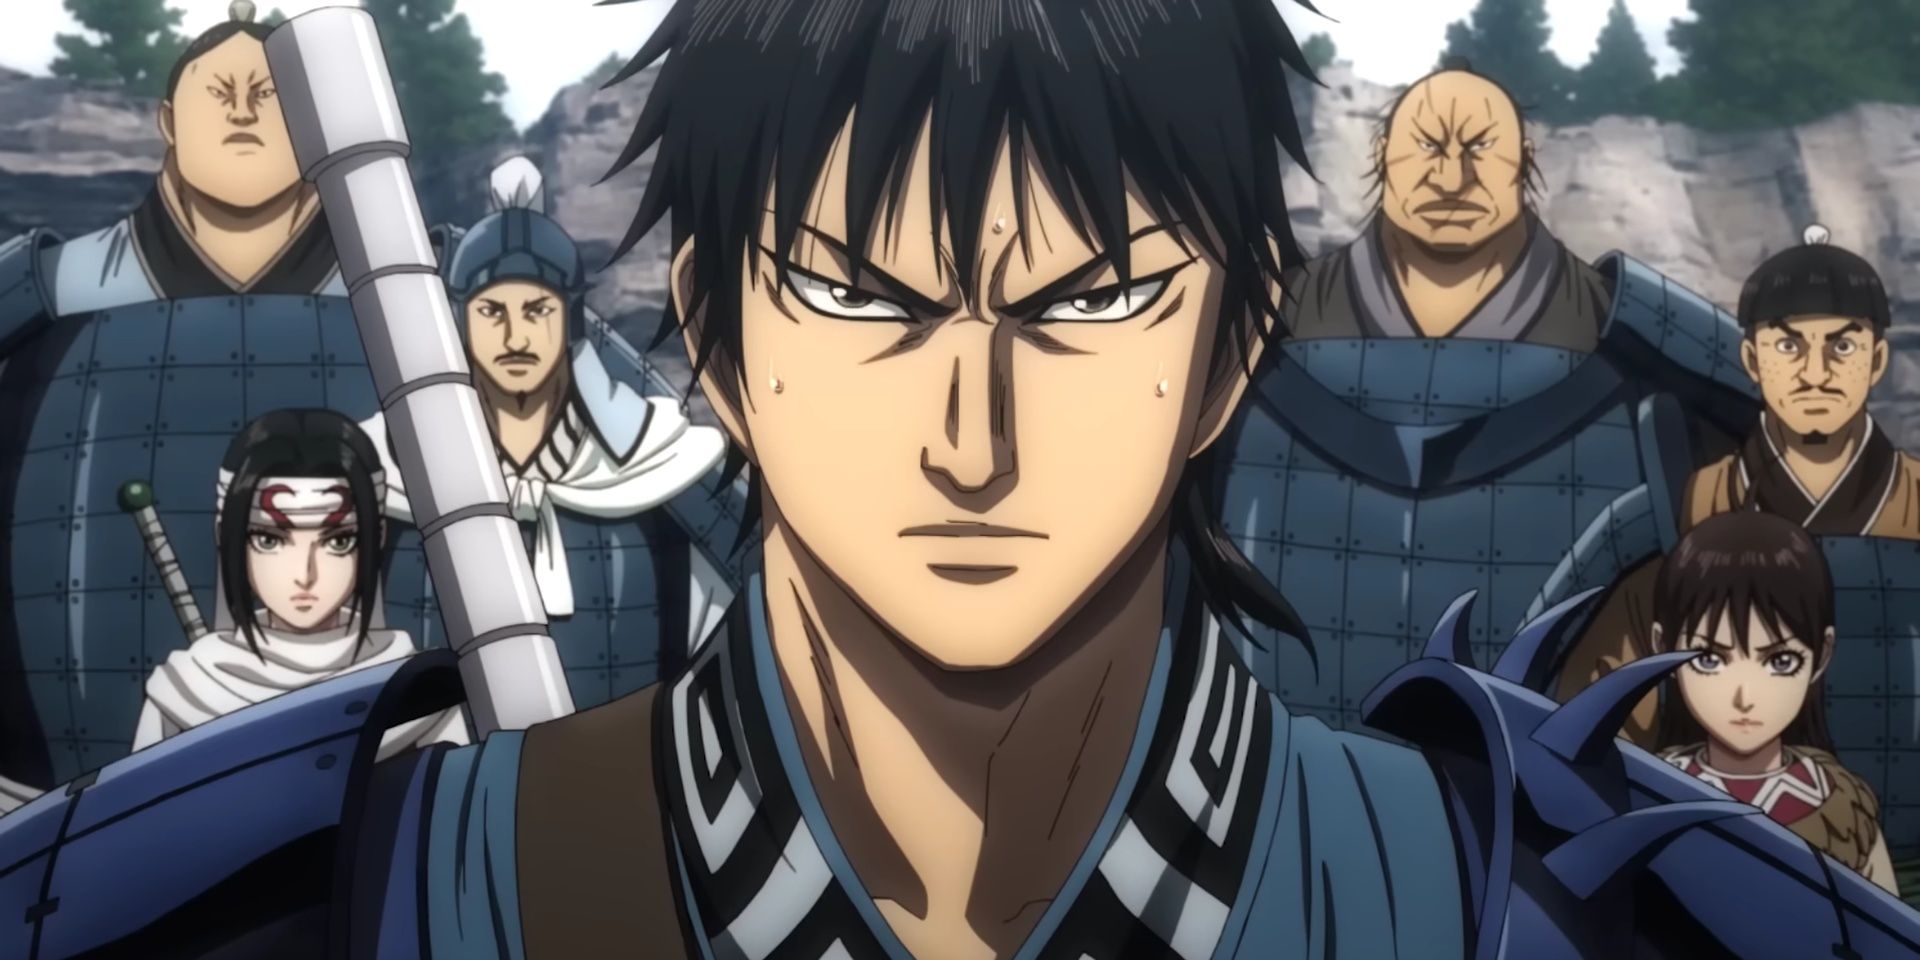 Shin looking angry but nervous in Kingdom Season 5 anime series